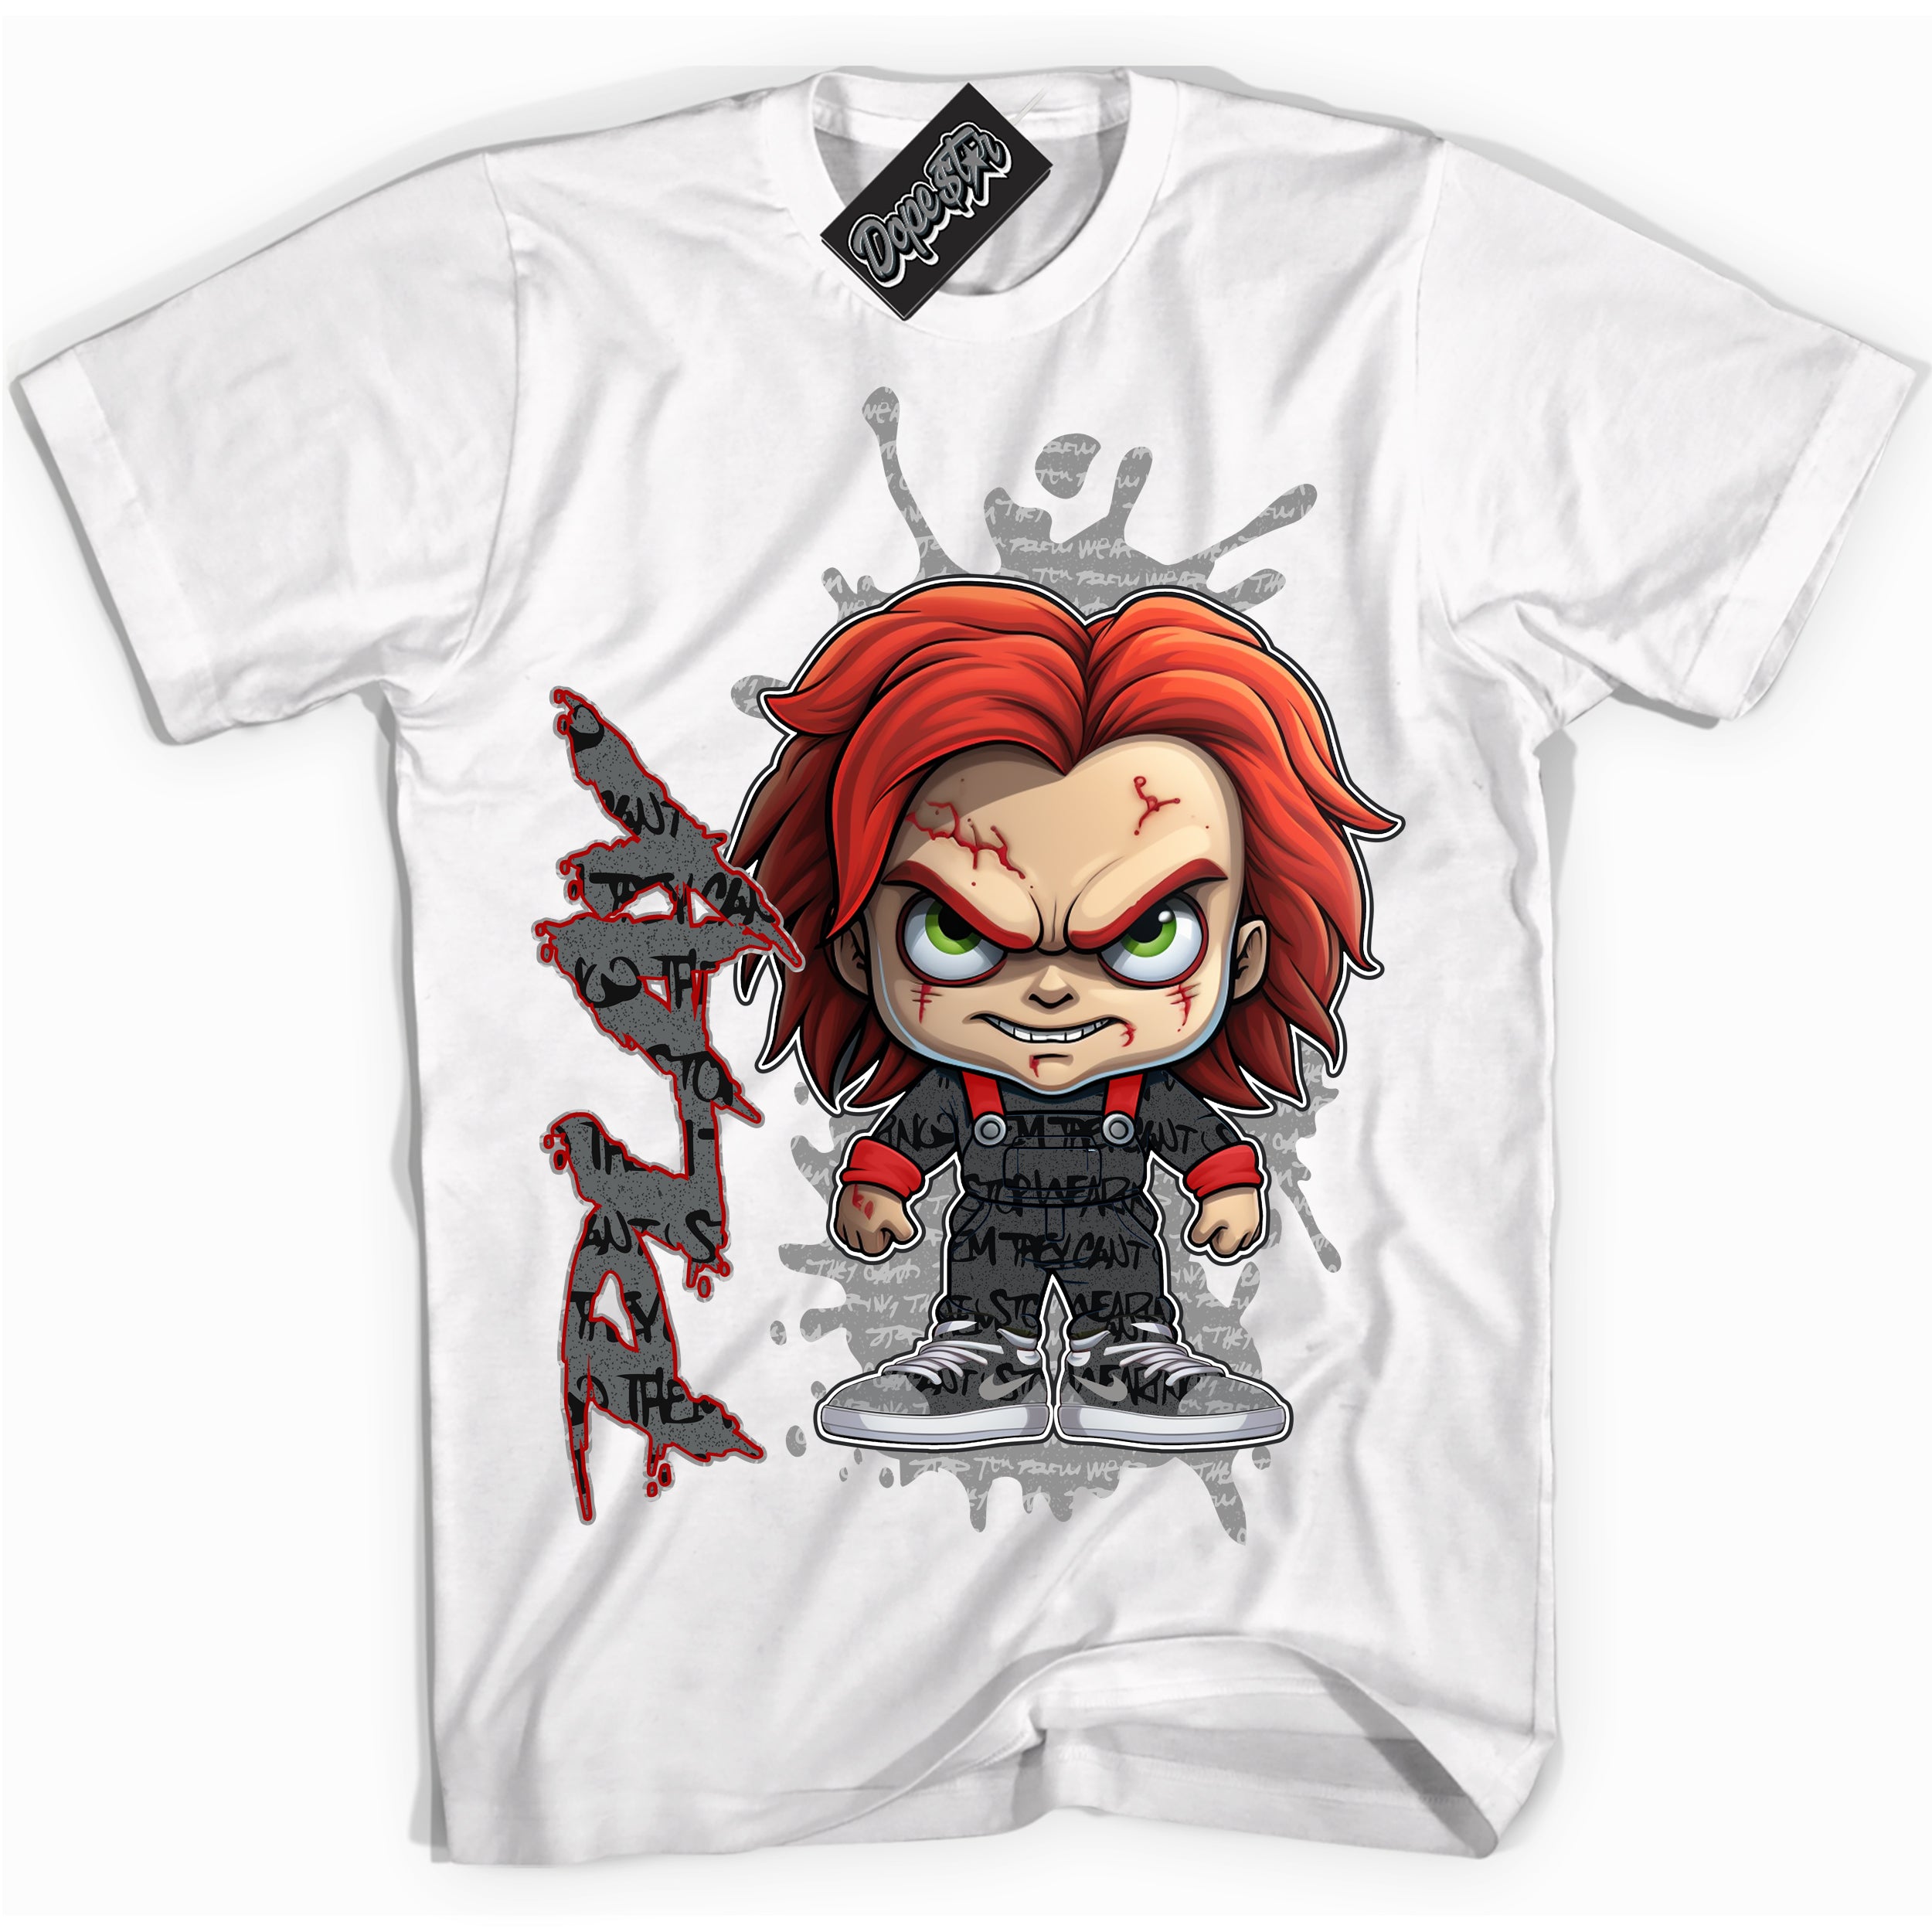 Cool White Shirt with “ Play ” design that perfectly matches Rebellionaire 1s Sneakers.